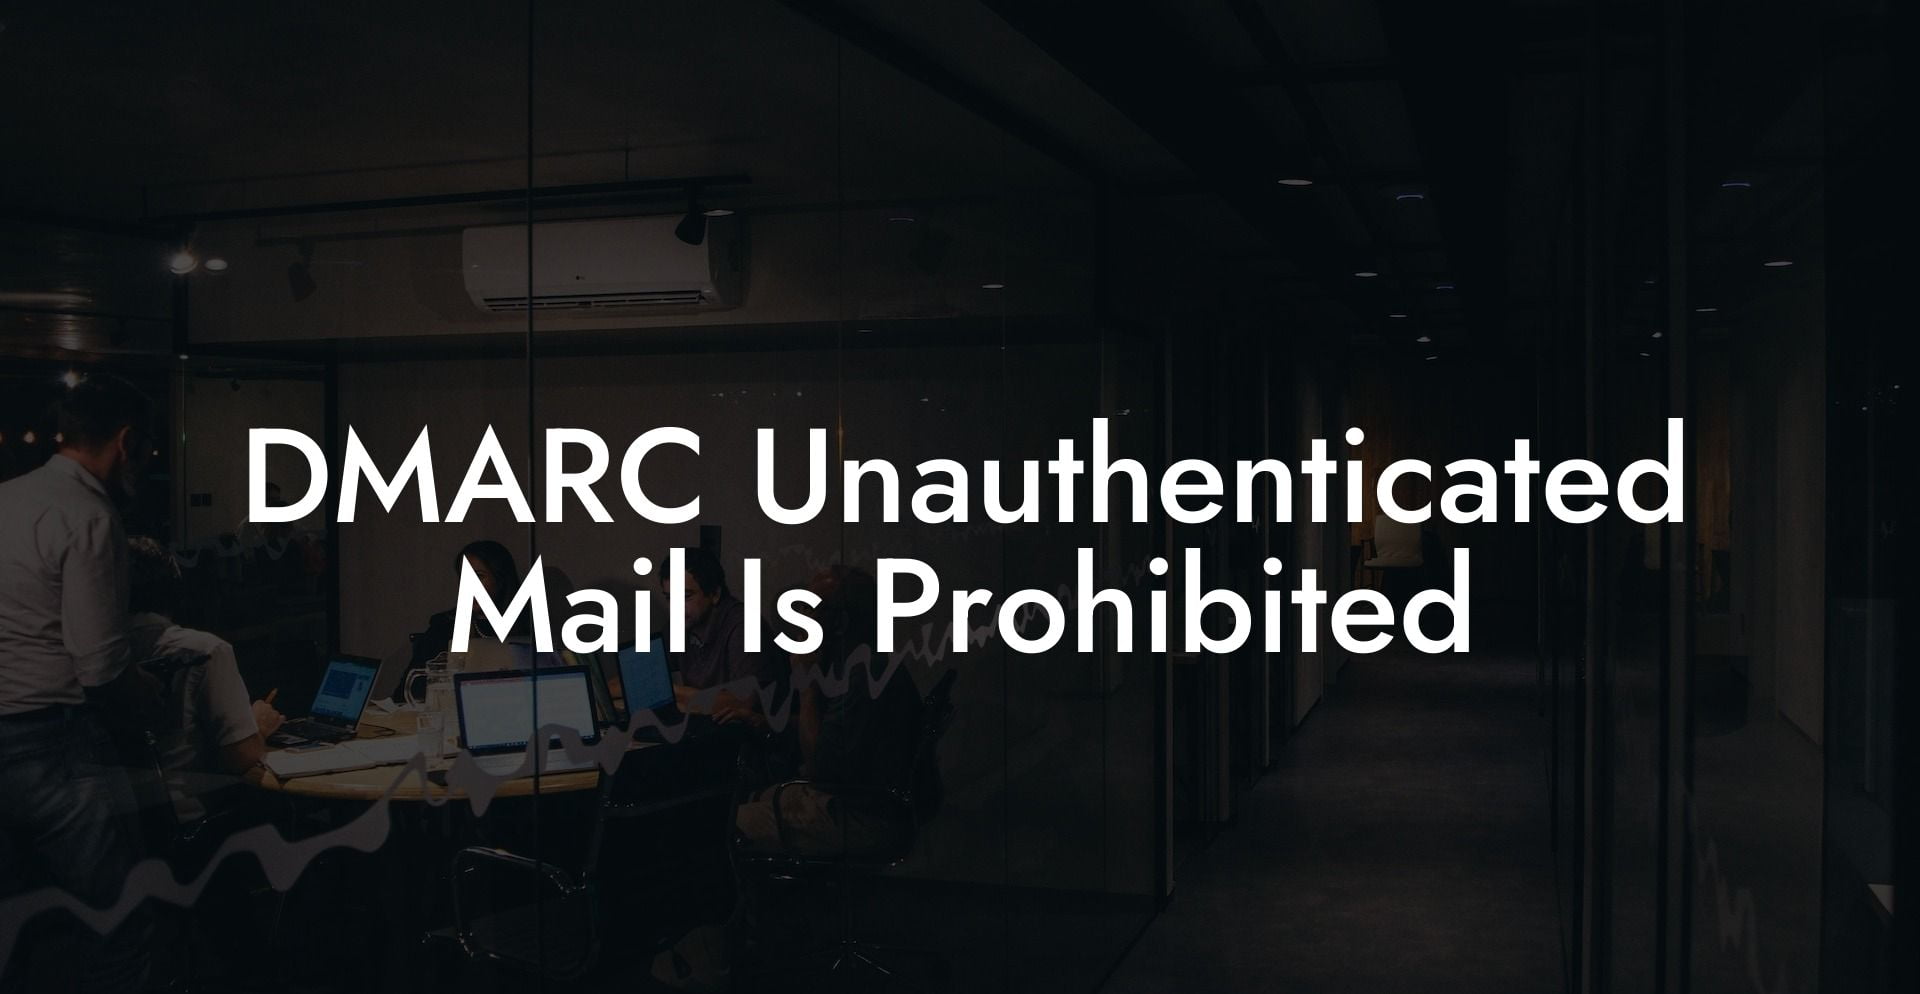 DMARC Unauthenticated Mail Is Prohibited